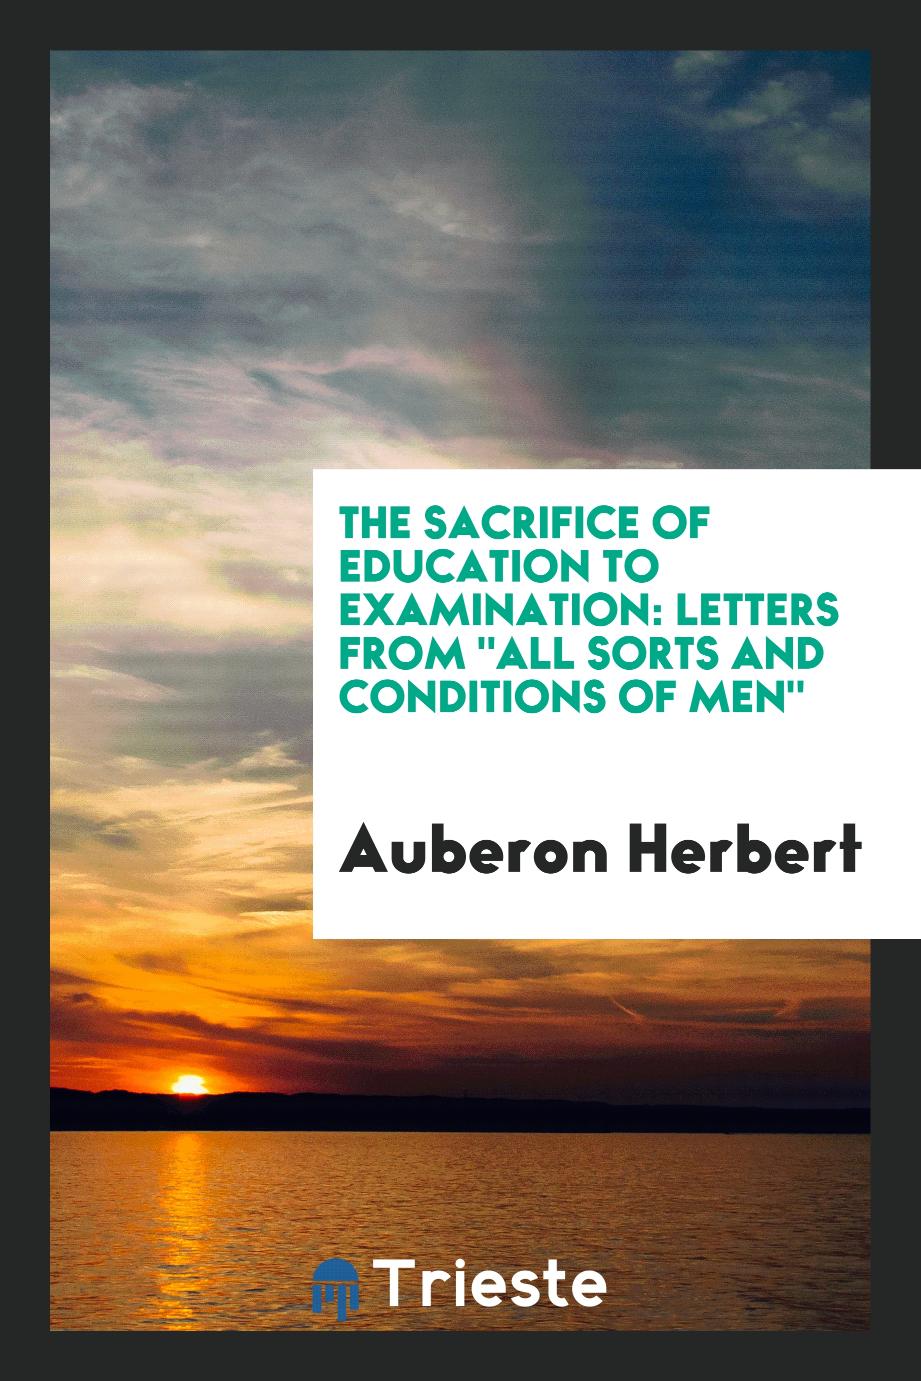 The sacrifice of education to examination: letters from "all sorts and conditions of men"